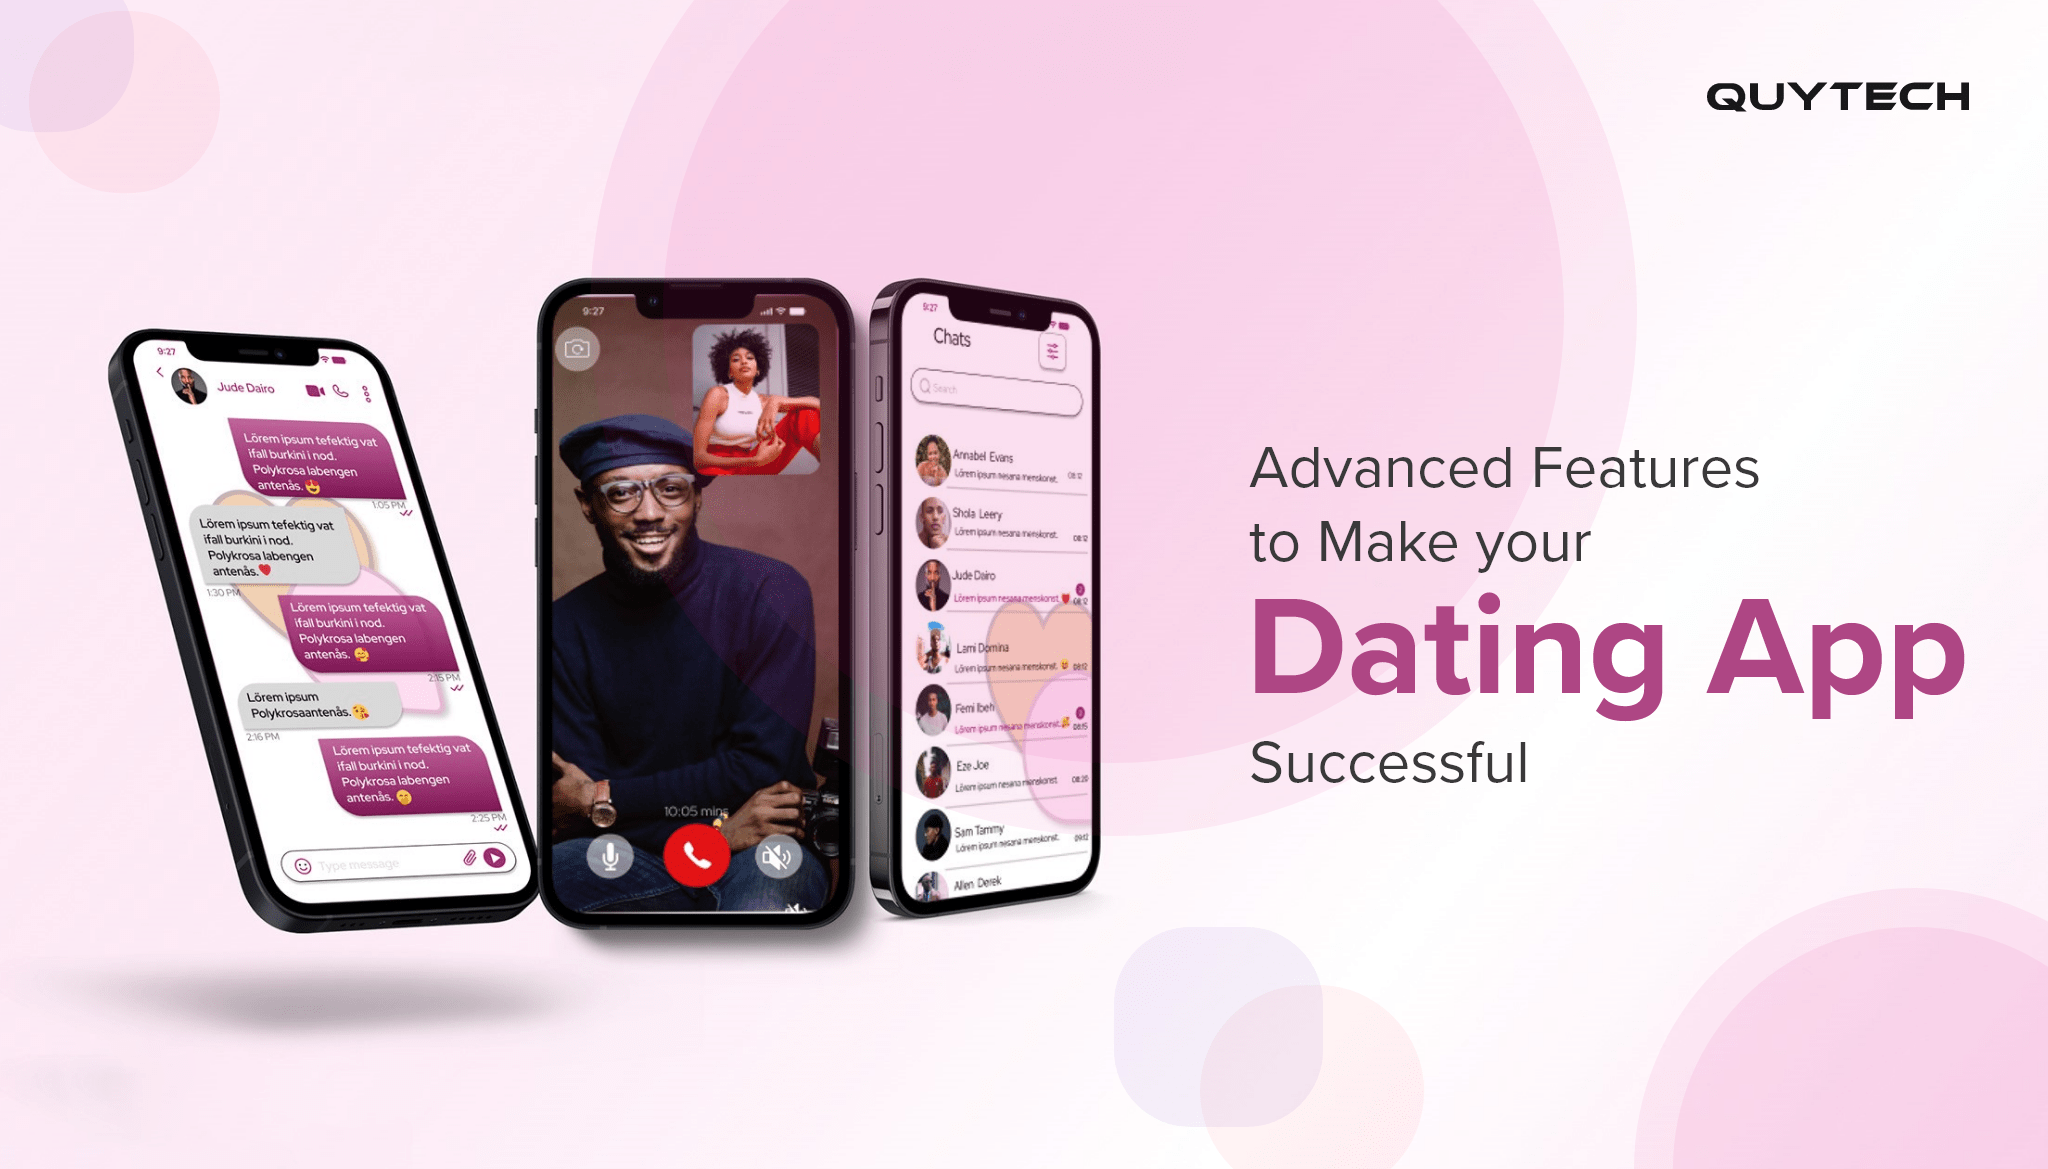 Advanced Features of dating app